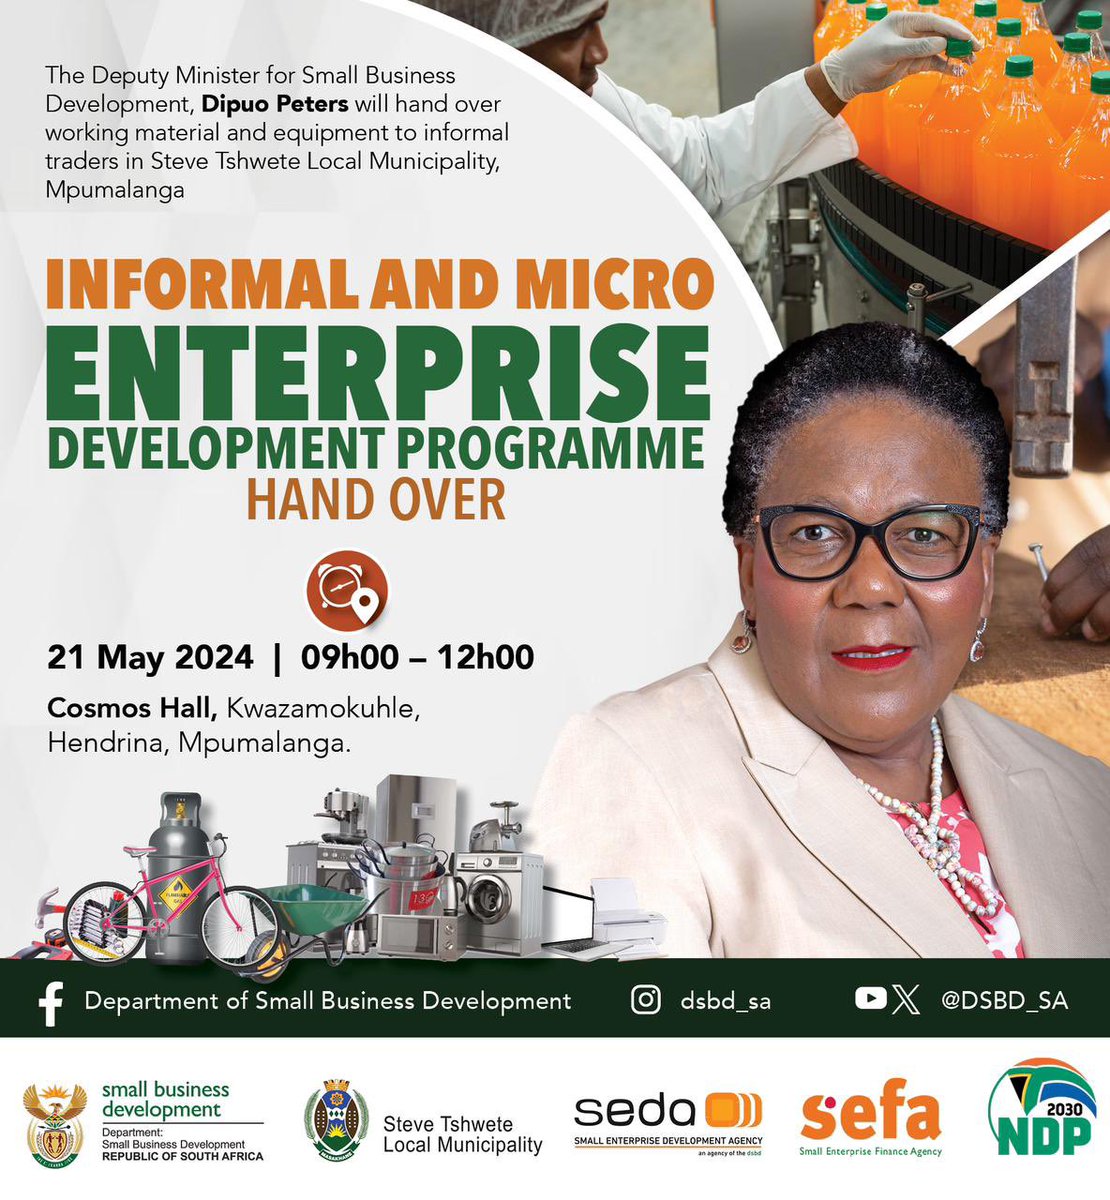 Deputy Minister for Small Business Development, Ms Dipuo Peters will hand over working material and equipment to informal traders at Cosmos Hall, Kwazamokuhle, Mpumalanga Province. #IMEDP #dsbdupliftinginformalsmmes